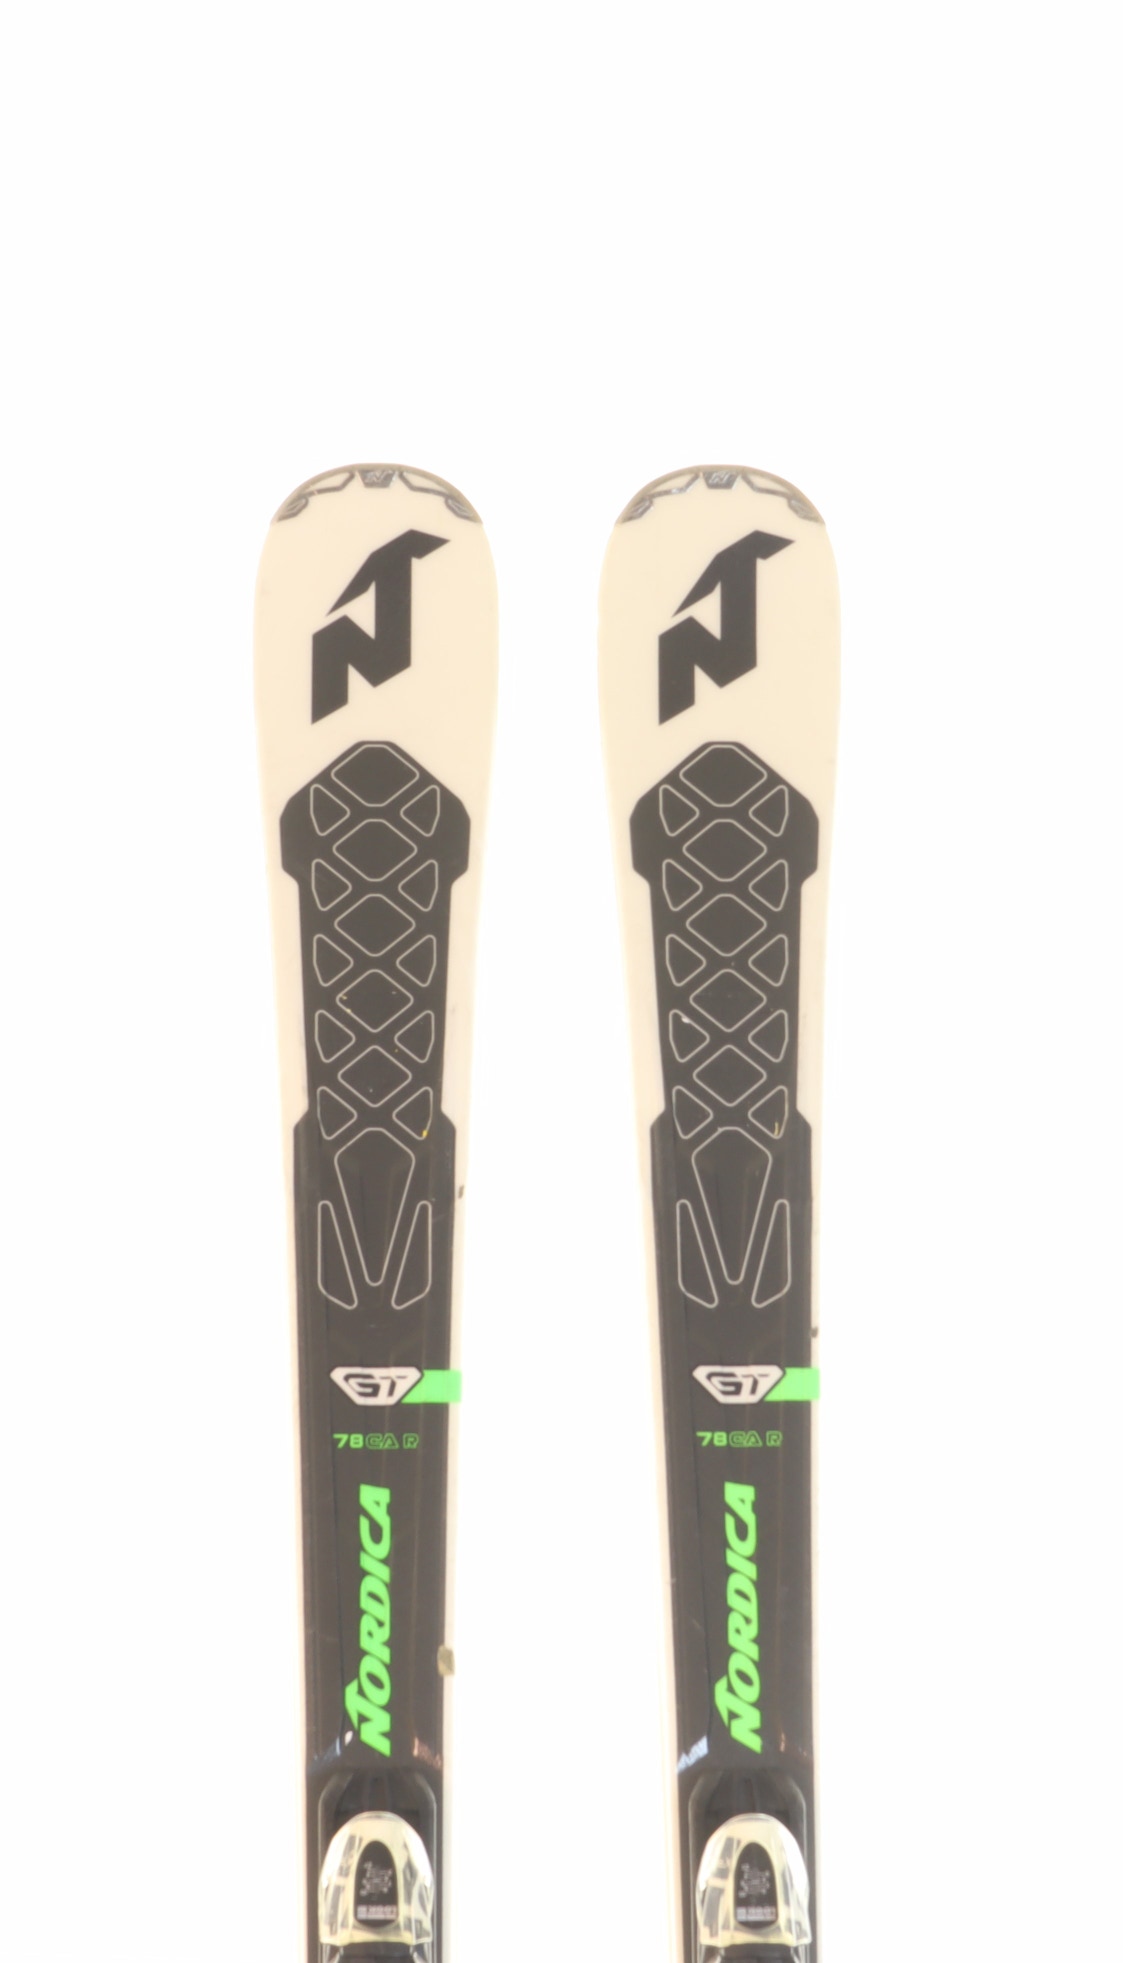 Used 2018 Nordica GT 78CA R Skis With Look Xpress 10 Bindings Size 168 (Option 230496)